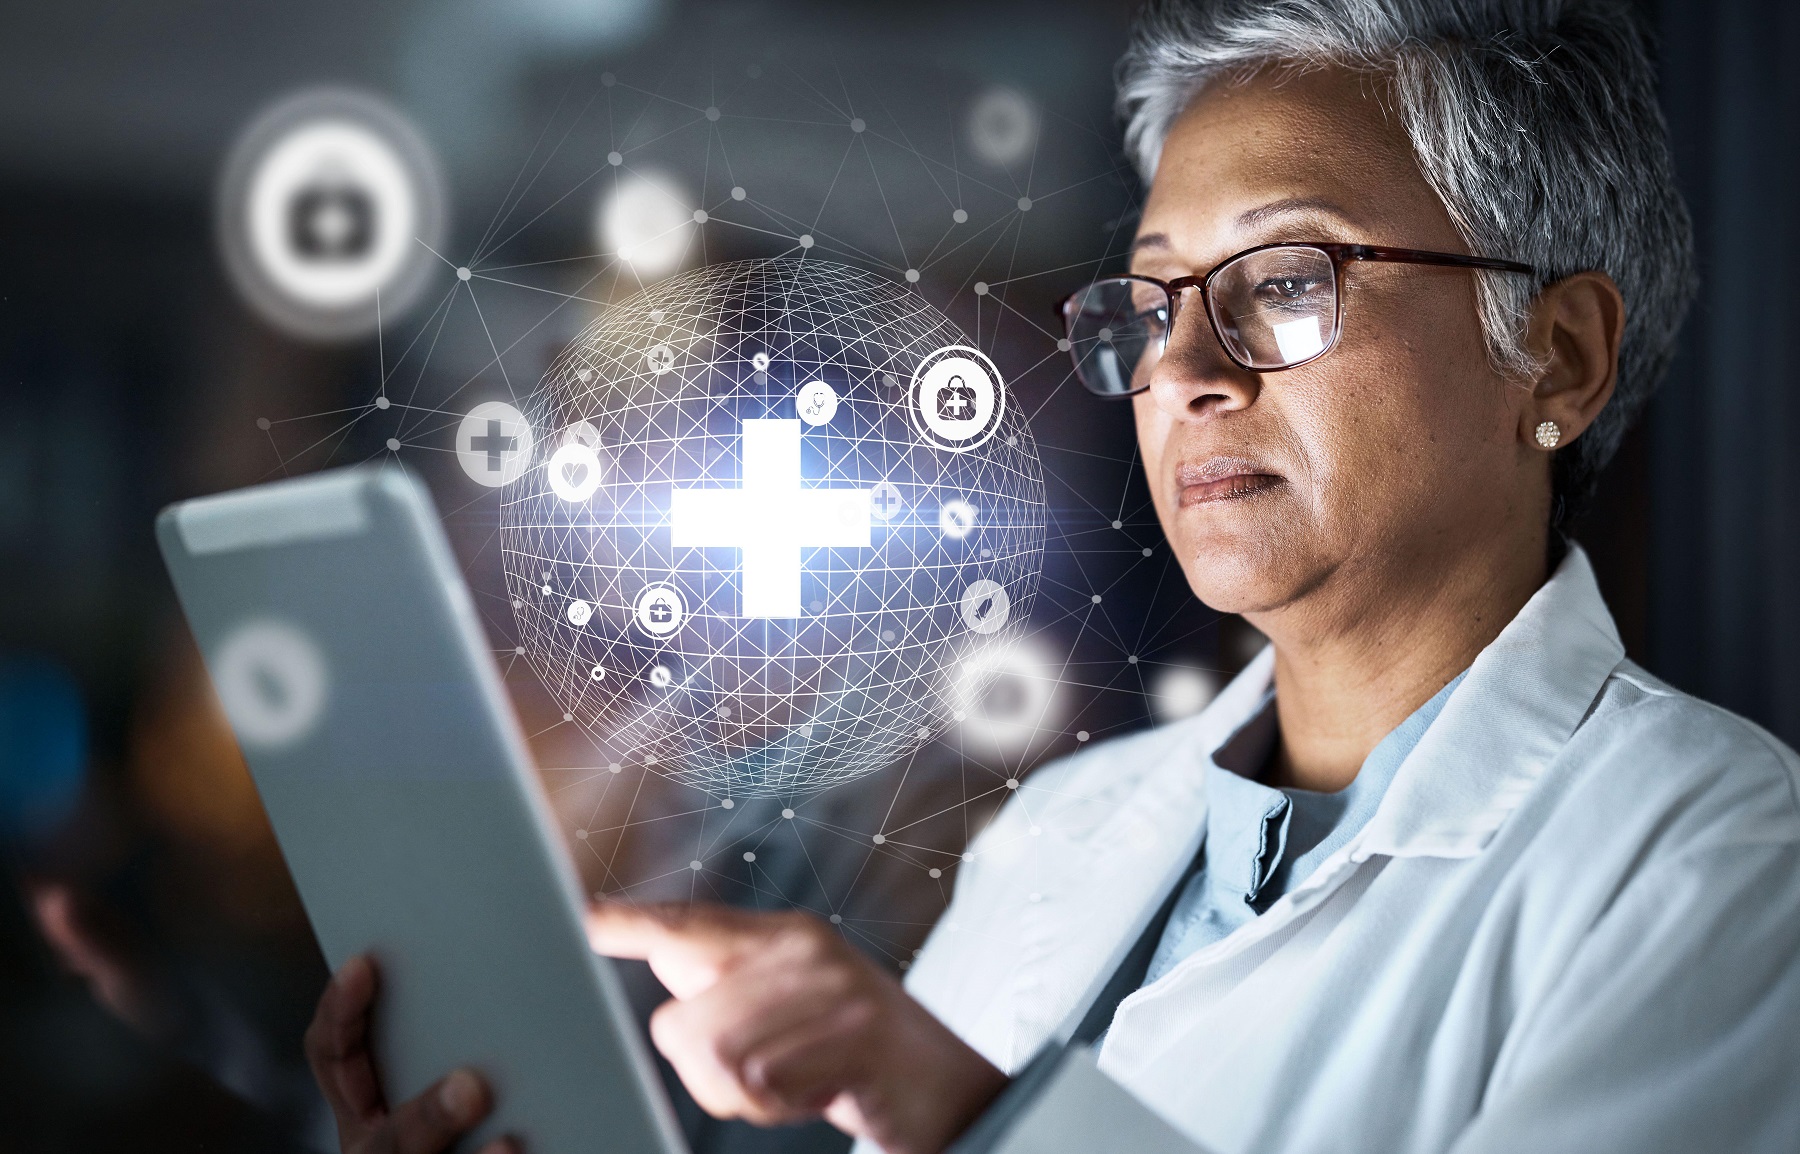 From Dark Reading – How Hospitals Can Help Improve Medical Device Data Security